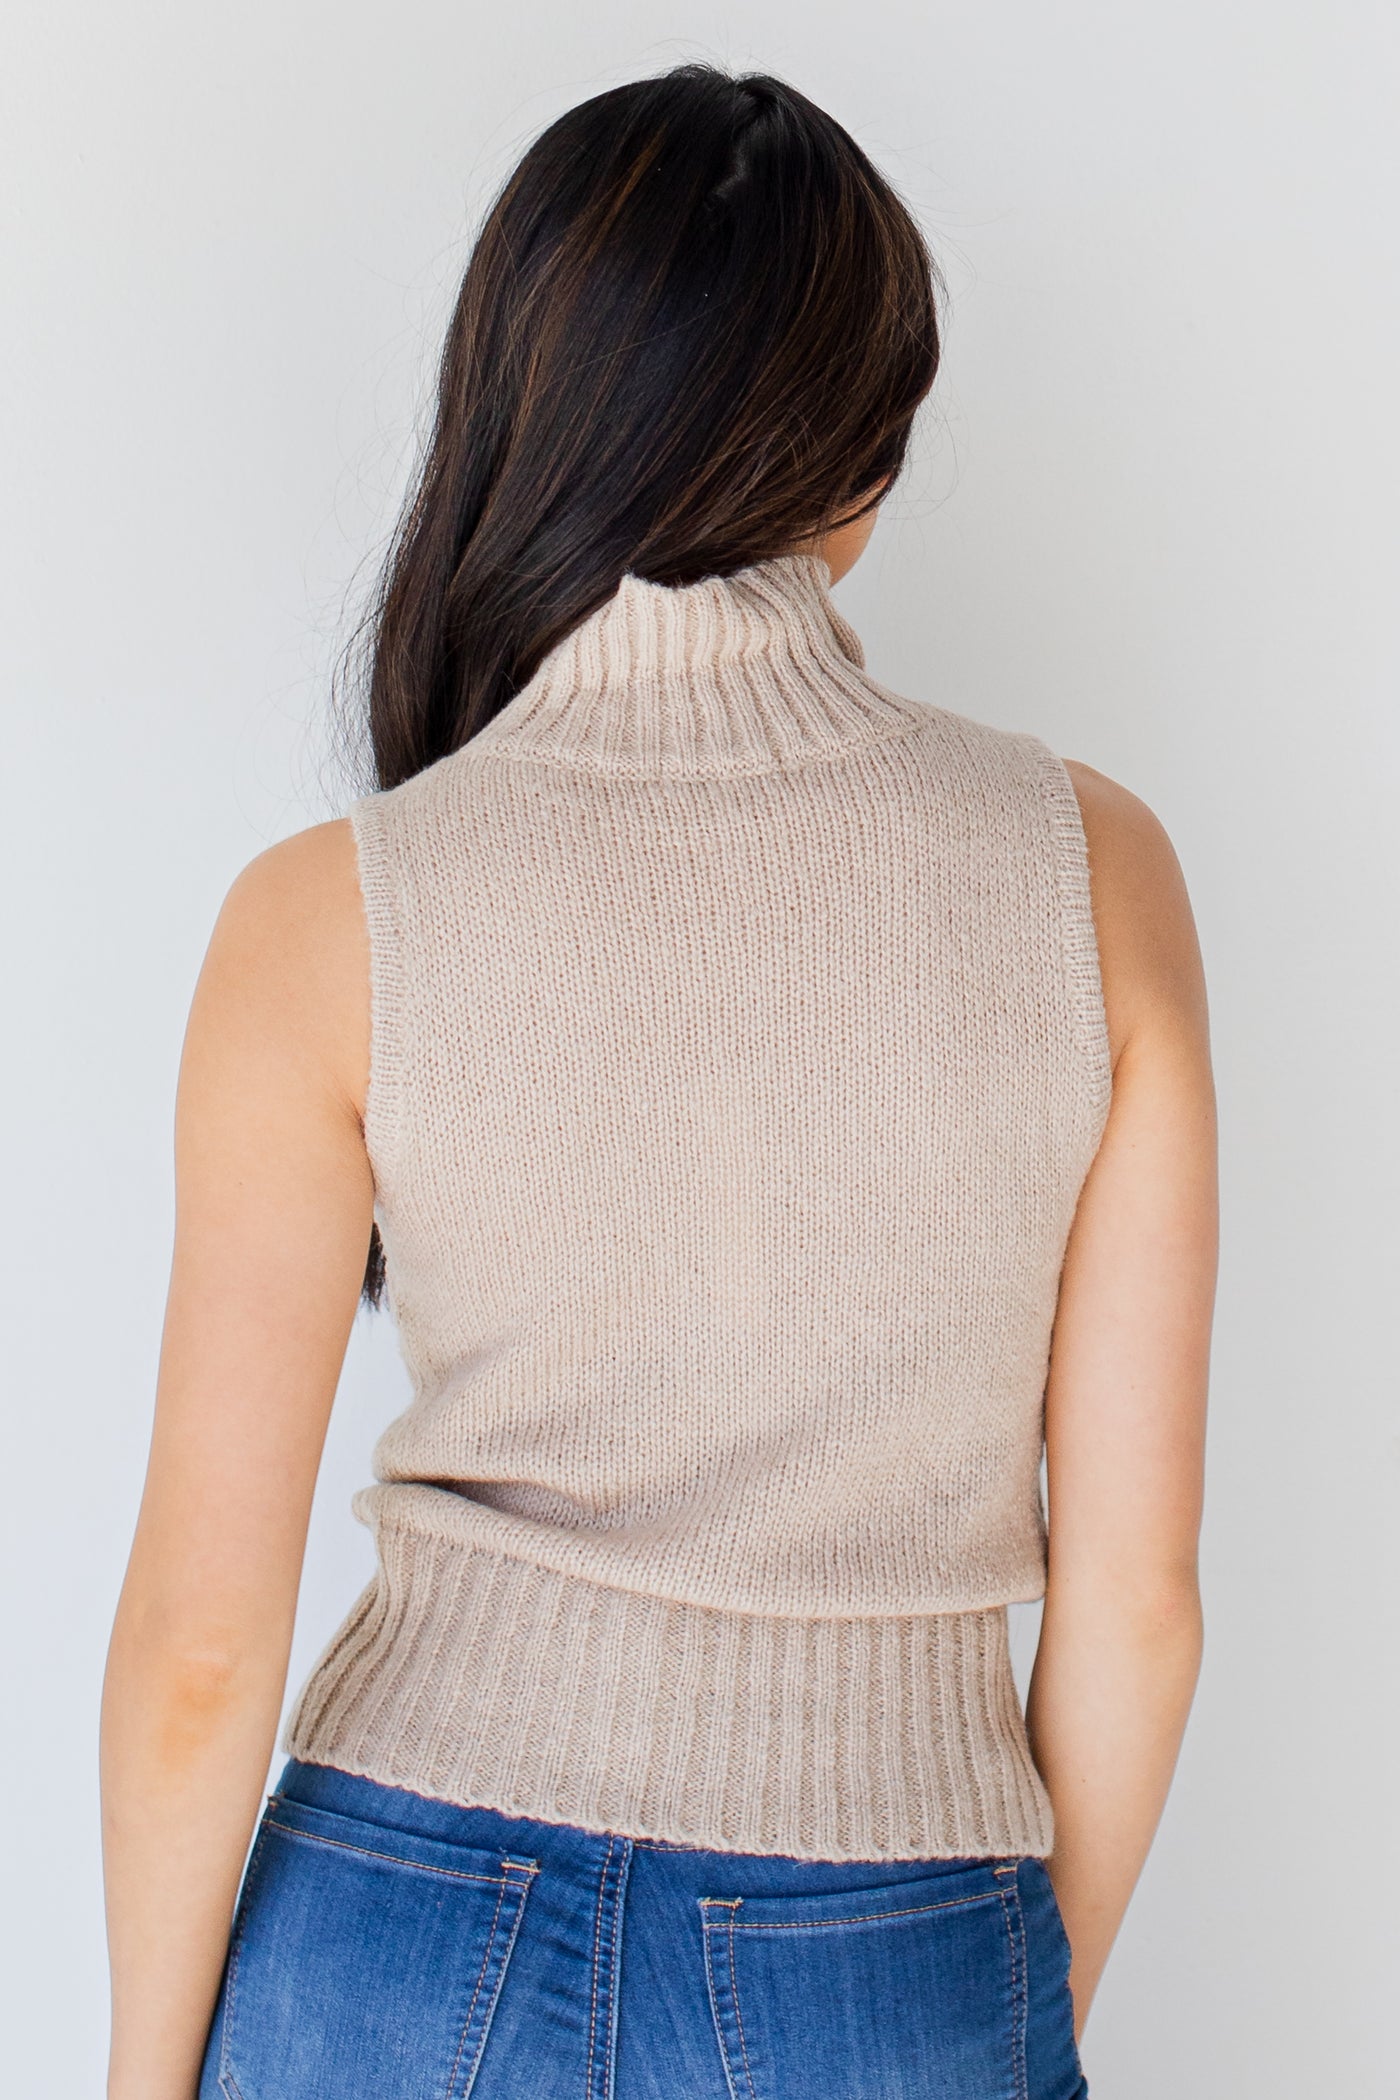 Sweater Tank in taupe back view